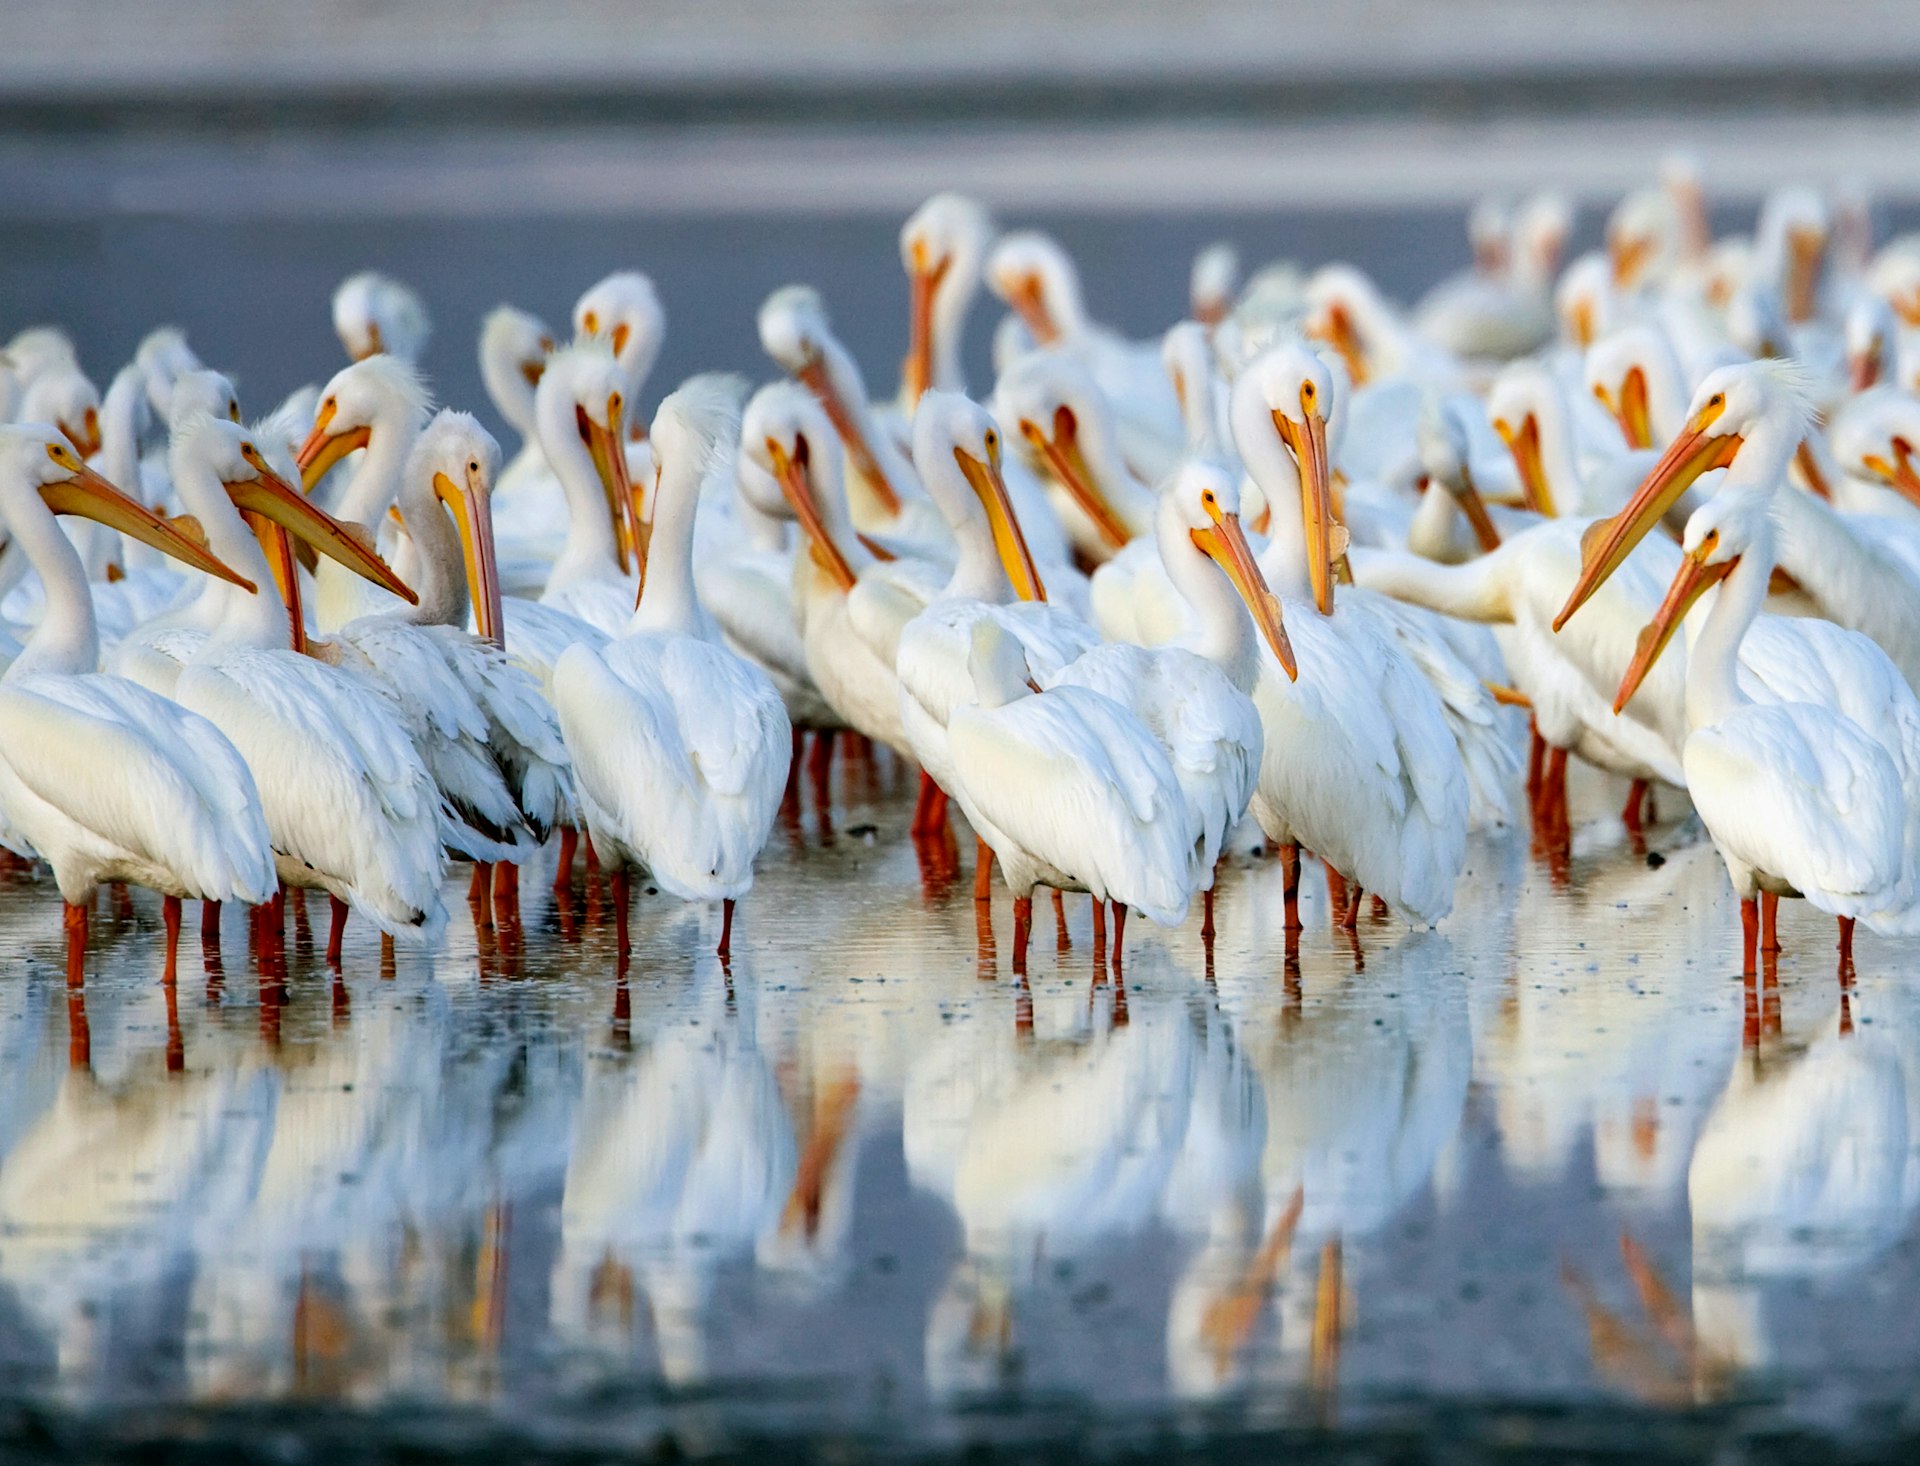 Birds, like these pelicans, flock to the briny waters of the Salton Sea © Kip Evans / Getty Images